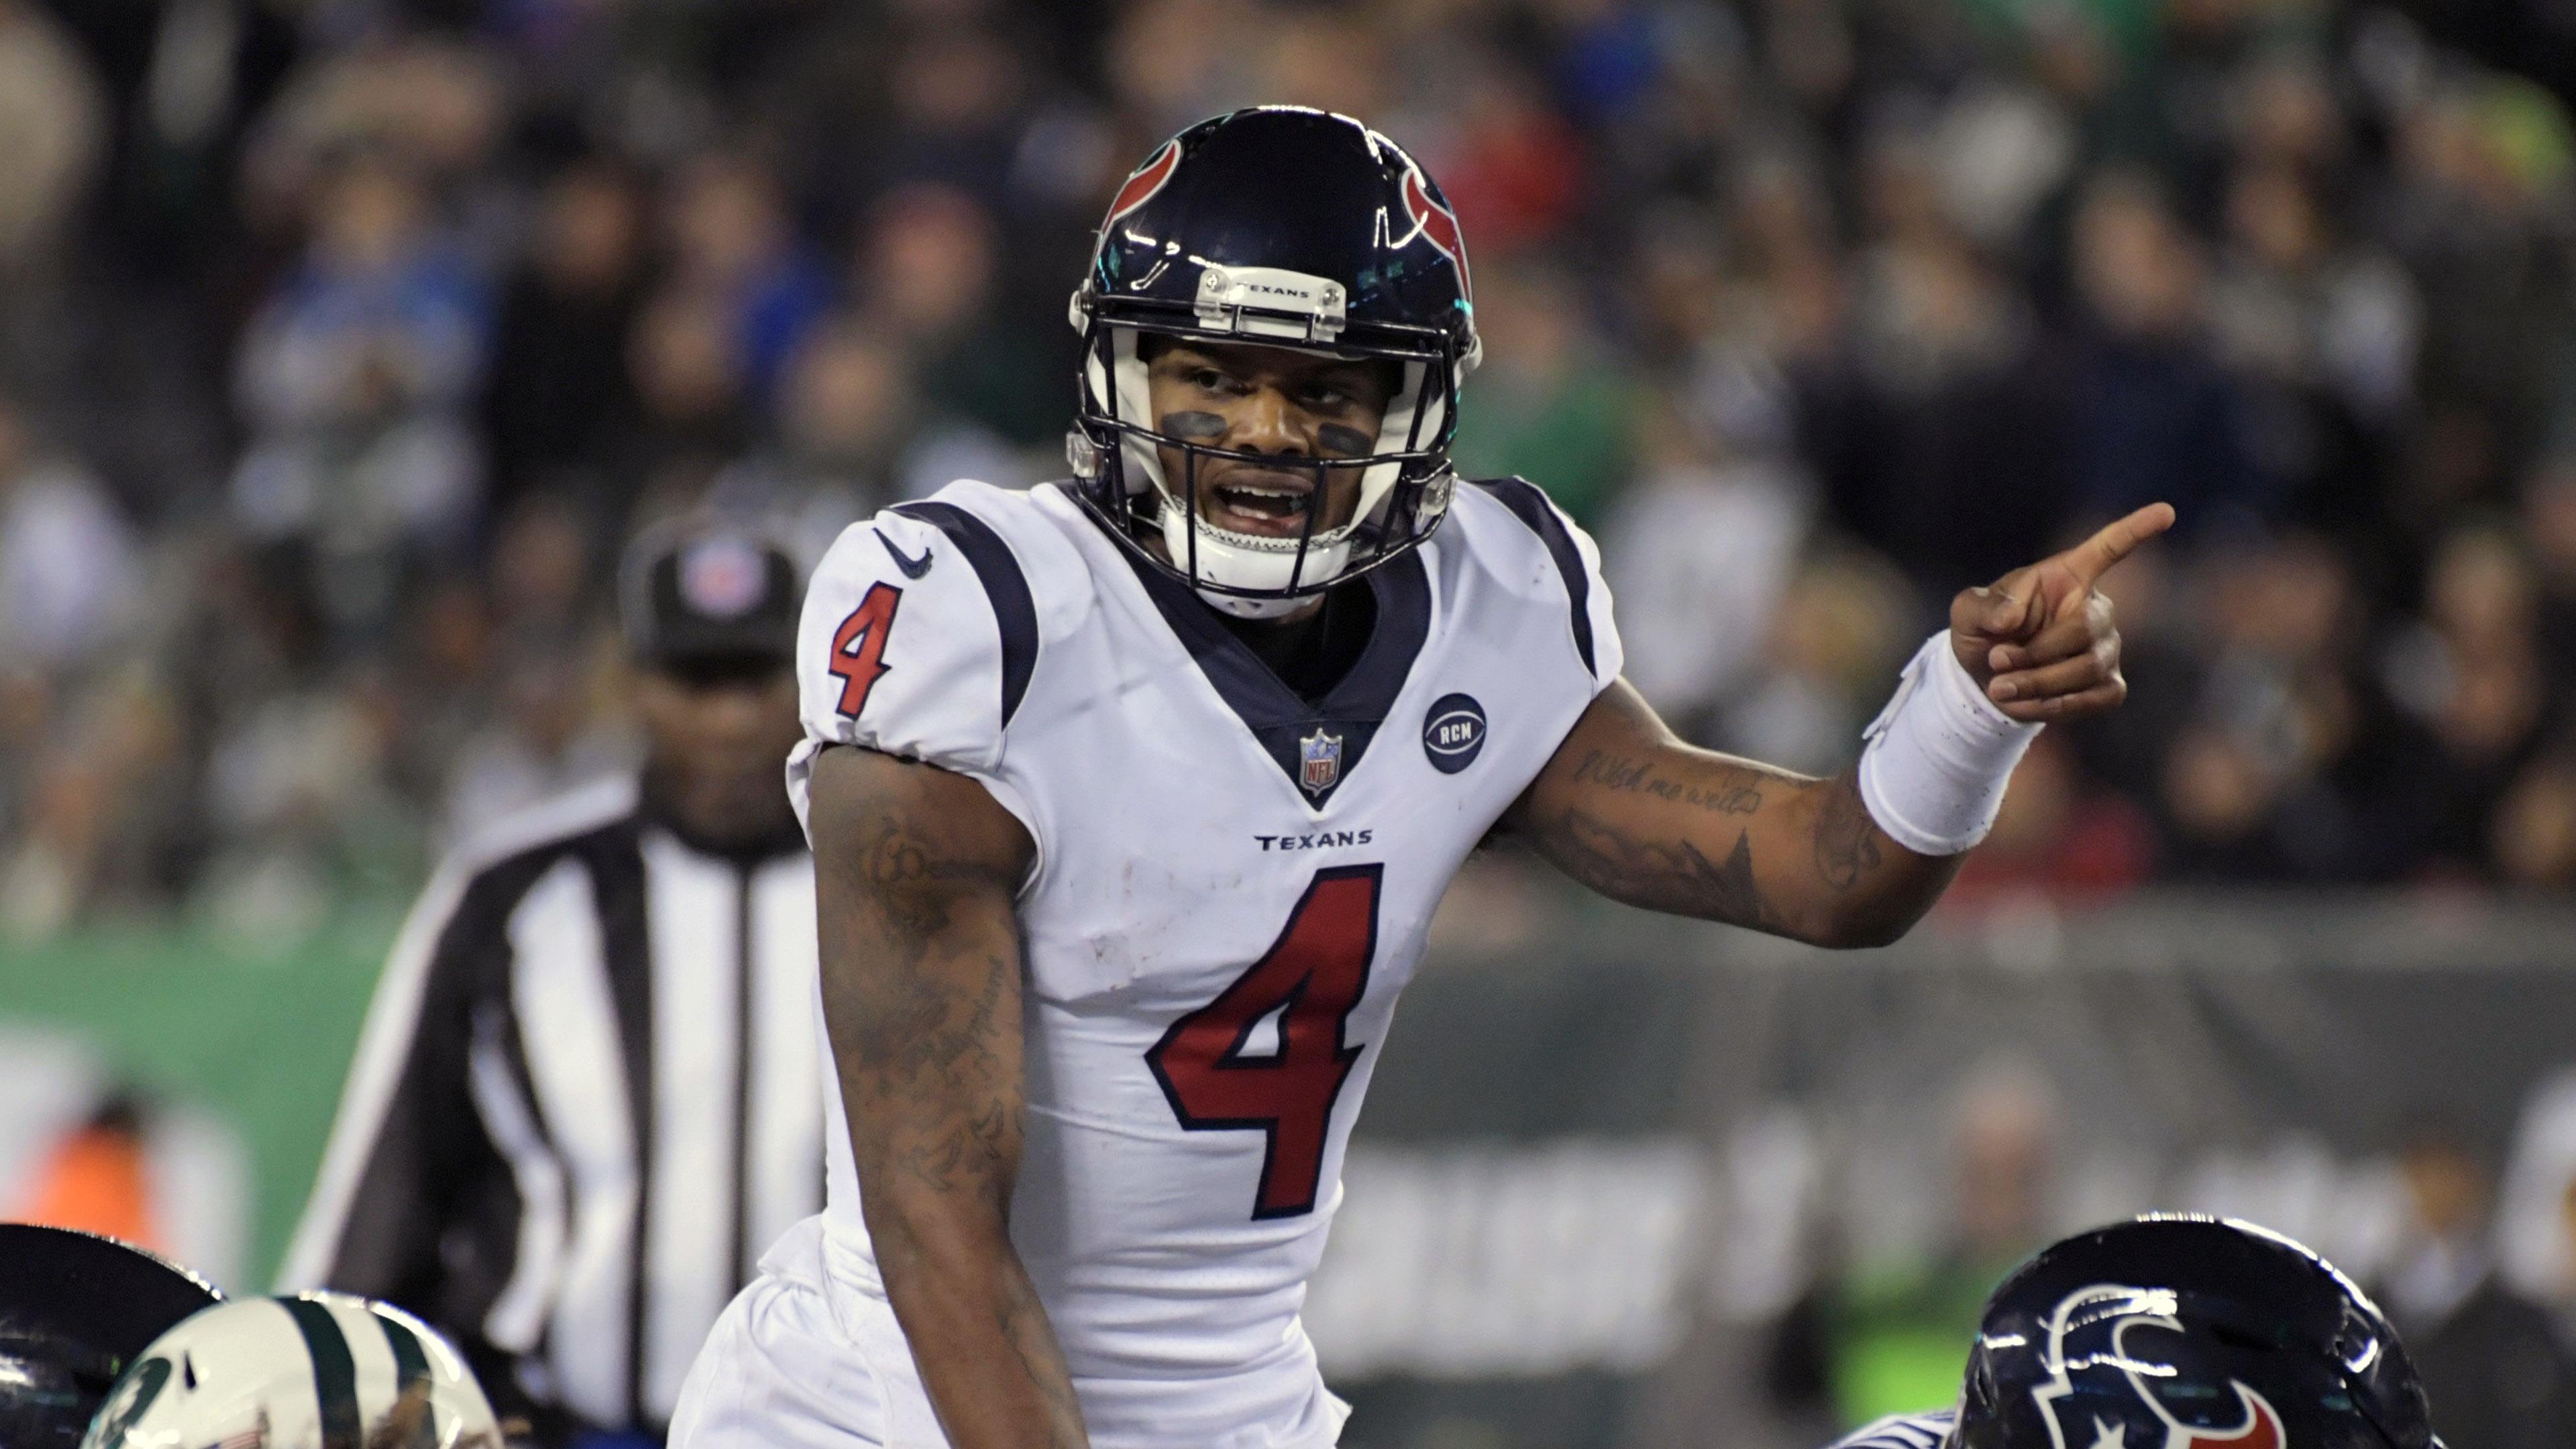 Dec 15, 2018; East Rutherford, NJ, USA; Houston Texans quarterback Deshaun Watson (4) gestures in the fourth quarter against the New York Jets at MetLife Stadium. The Texans defeated the Jets 29-22. Mandatory Credit: Kirby Lee-USA TODAY Sports / © Kirby Lee-USA TODAY Sports